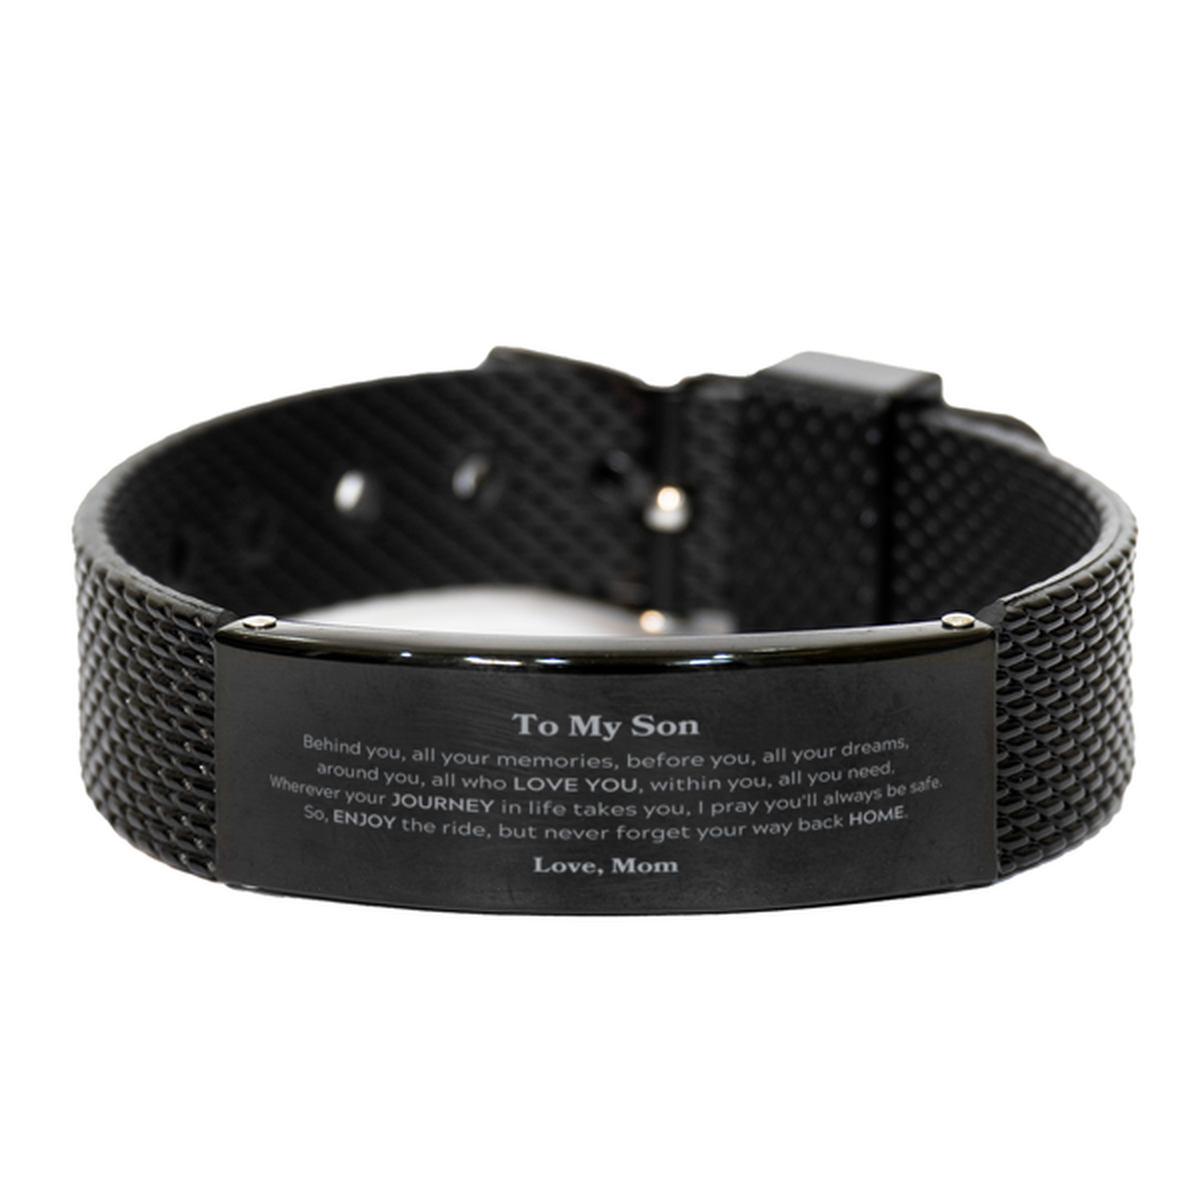 To My Son Graduation Gifts from Mom, Son Black Shark Mesh Bracelet Christmas Birthday Gifts for Son Behind you, all your memories, before you, all your dreams. Love, Mom